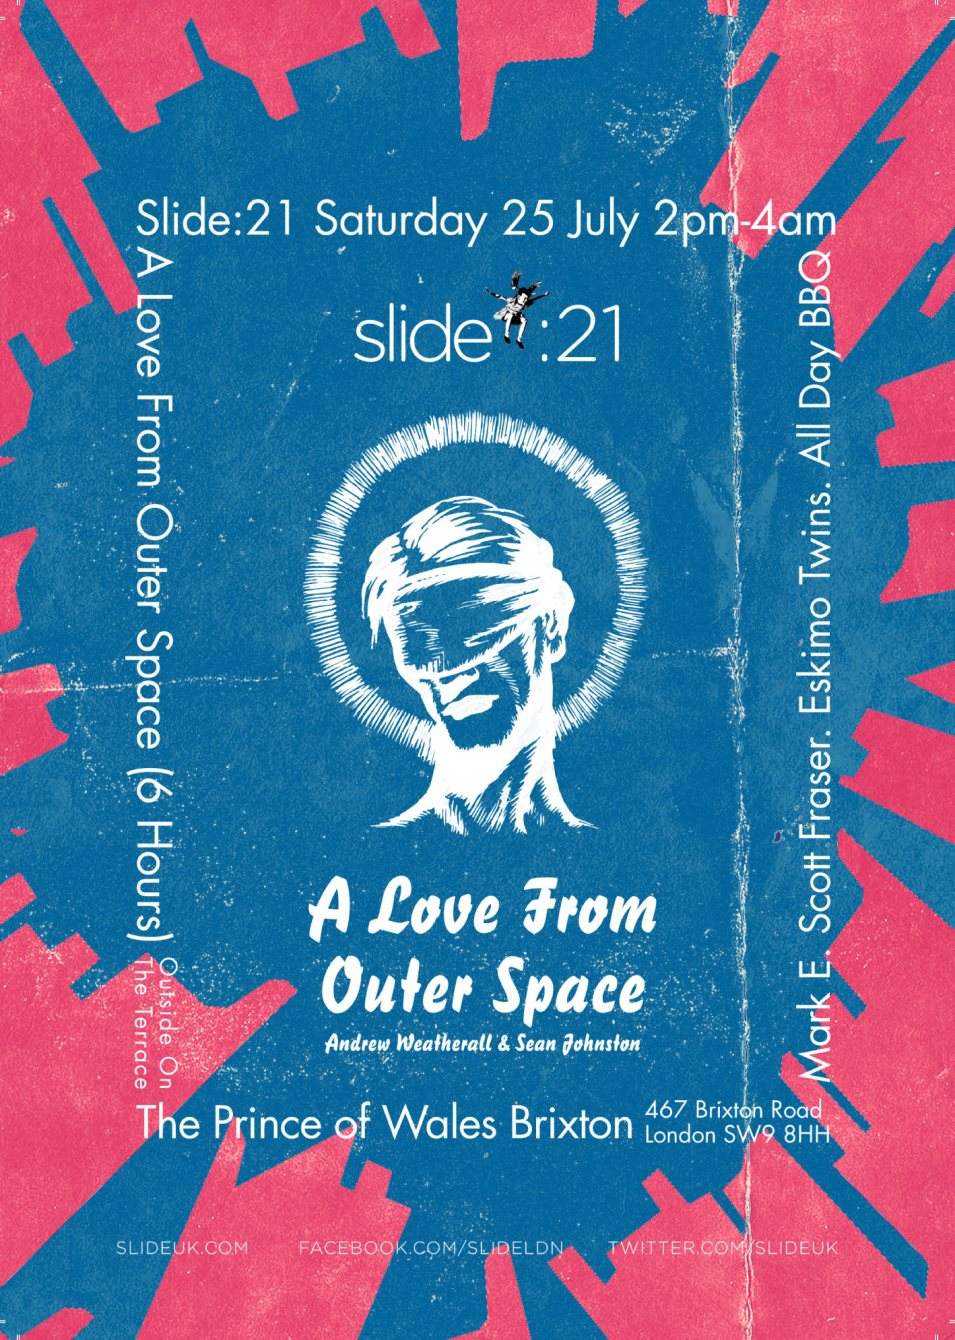 Slide:21 with A Love From Outer Space (Andrew Weatherall & Sean Johnston) - フライヤー表